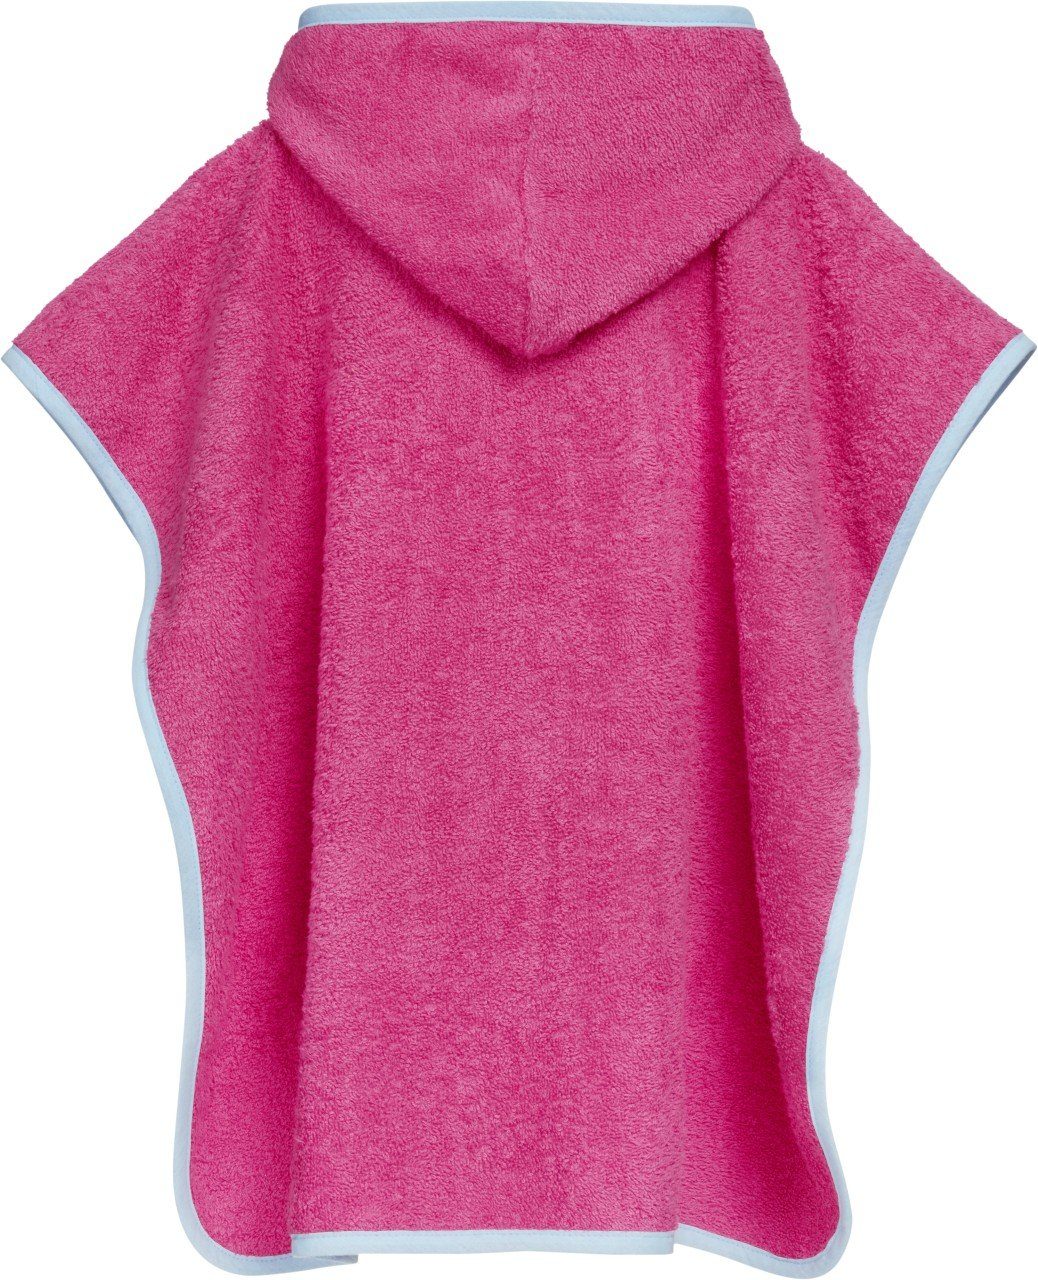 Playshoes Badeponcho Frottee-Poncho Flamingo